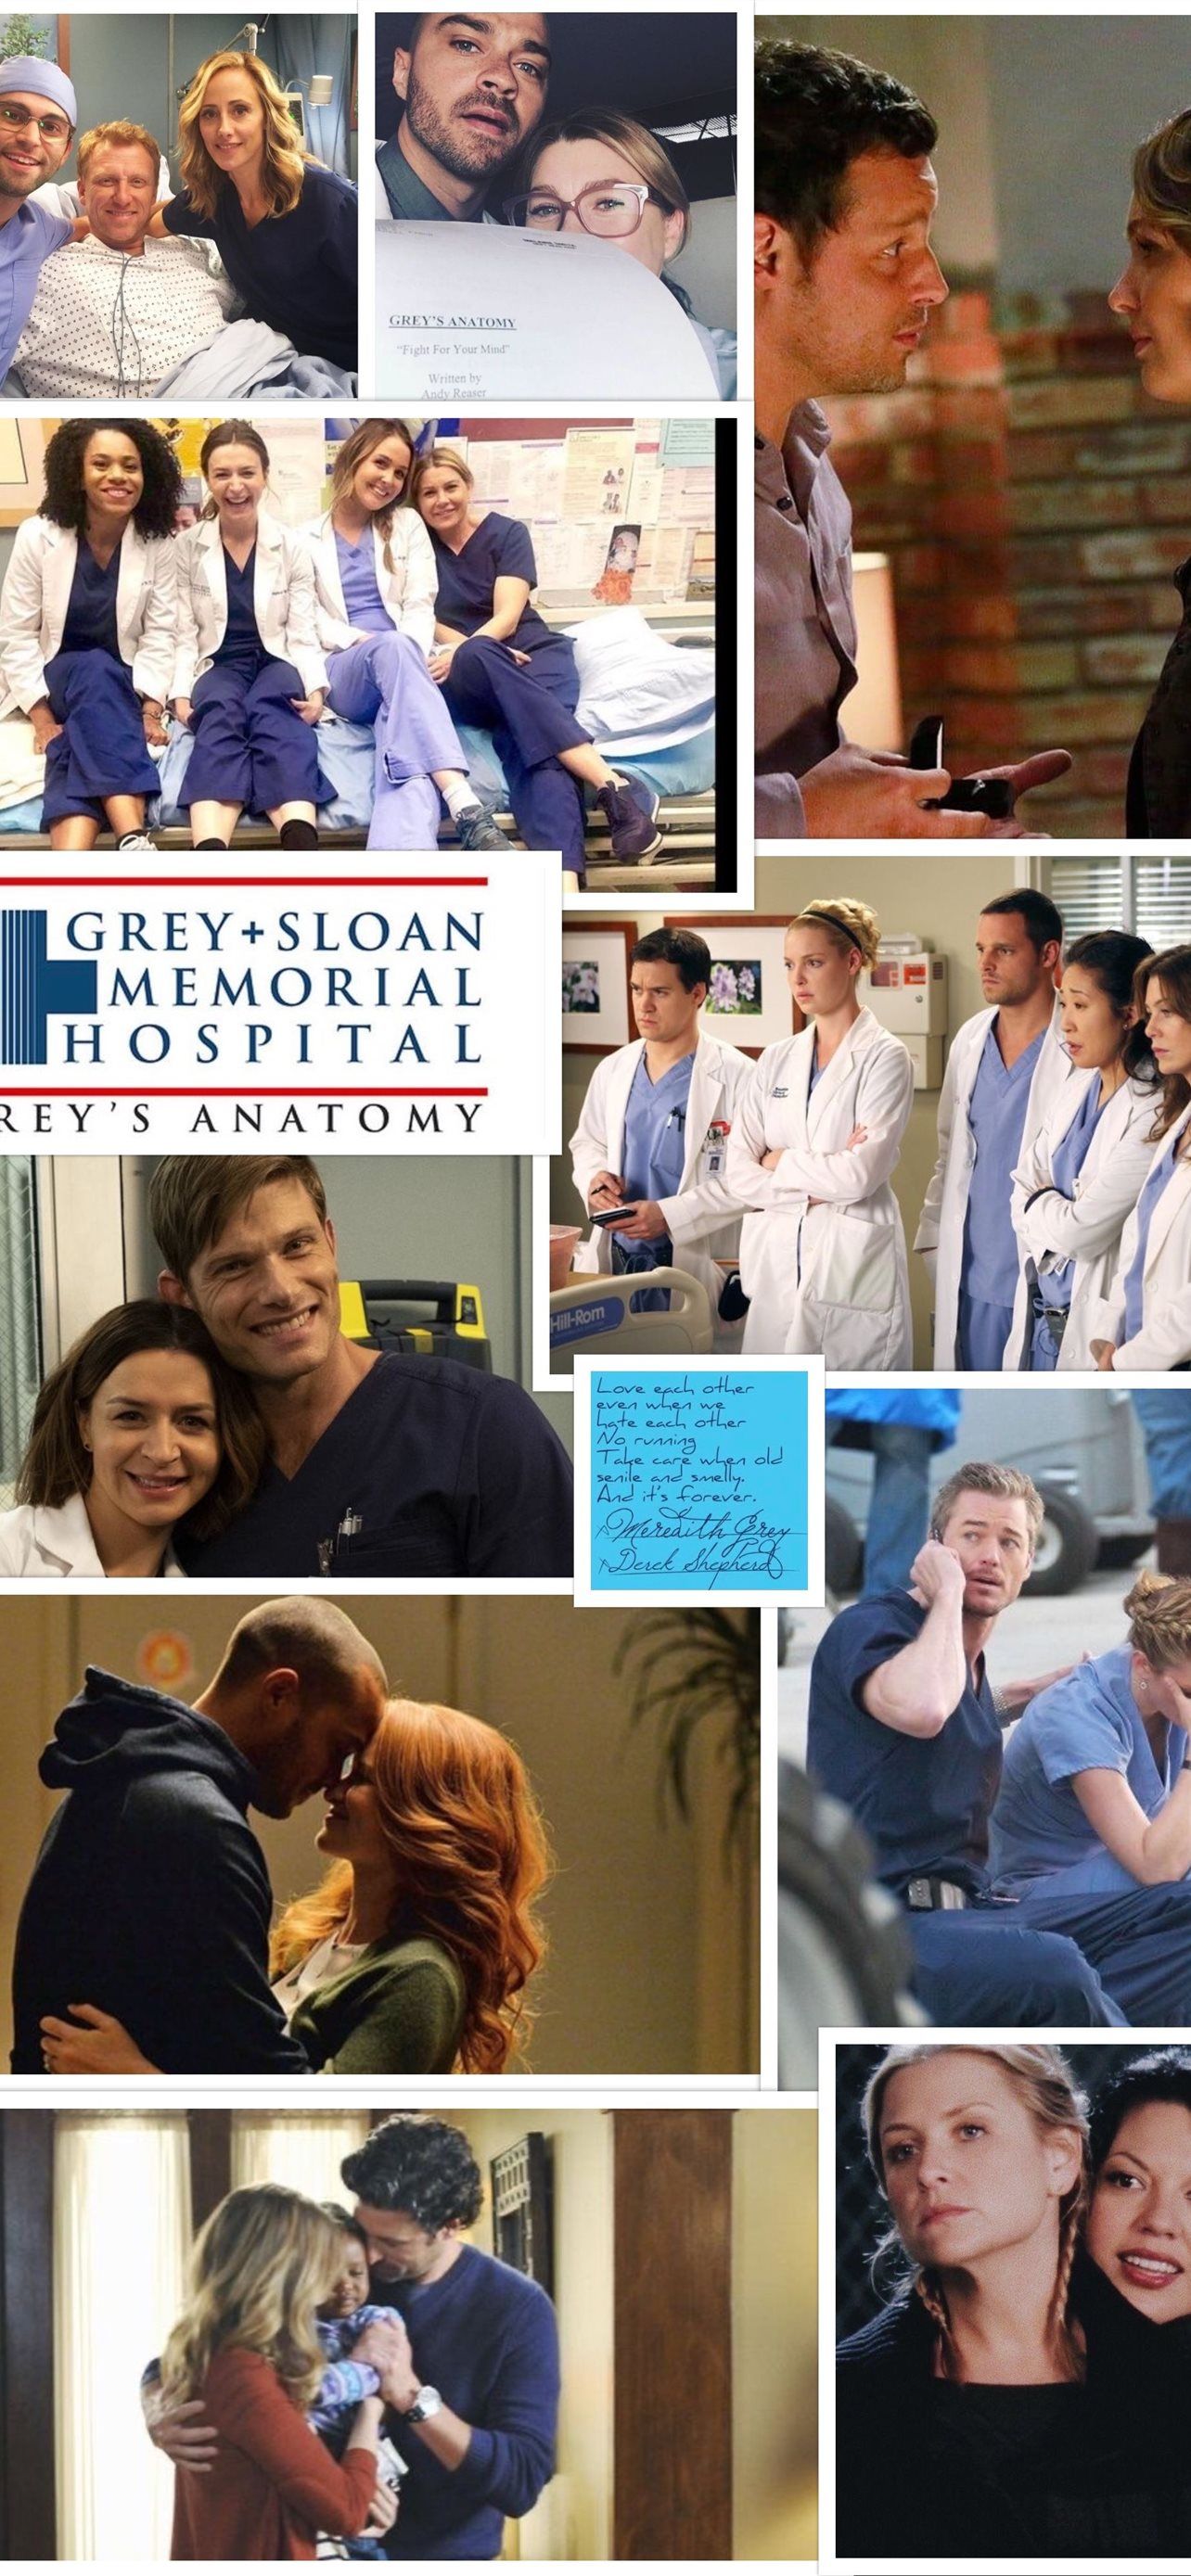 A collage of Greys Anatomy characters and couples. - Grey's Anatomy